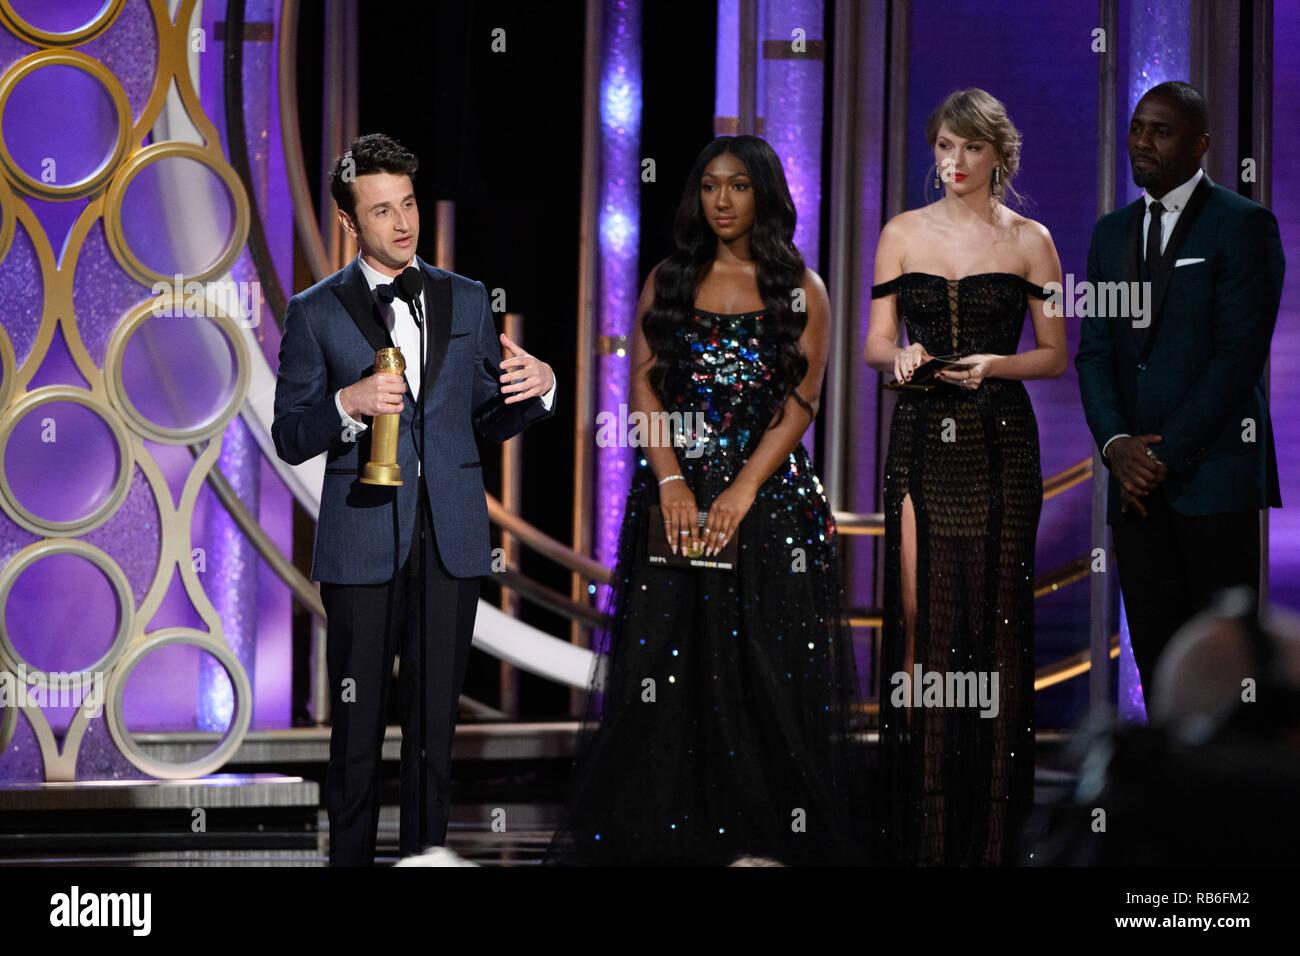 Beverly Hills, USA. 06th Jan, 2019. The Golden Globe is awarded to Justin Hurwitz for BEST ORIGINAL SCORE - MOTION PICTURE for 'First Man' at the 76th Annual Golden Globe Awards at the Beverly Hilton in Beverly Hills, CA on Sunday, January 6, 2019. Credit: PictureLux/The Hollywood Archive/Alamy Live News Stock Photo